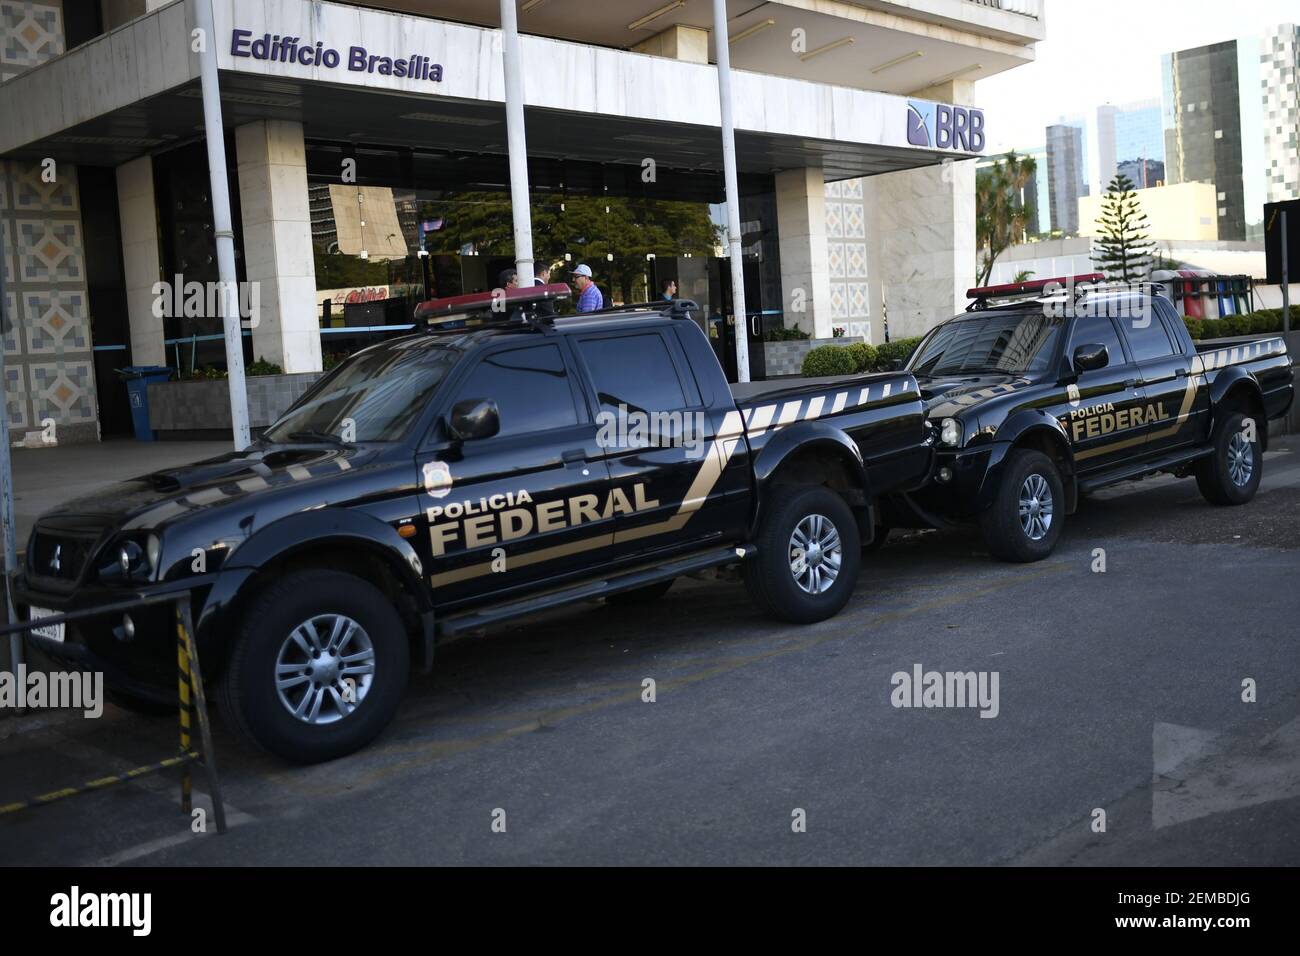 DF - Brasilia - 01/29/2019 - Operation PF BRB - The Federal Police holds this Tuesday, January 29, the search and seizure at the BRB headquarters, Banco de Brasilia, to investigate a suspected payment scheme for tuition fees of R $ 16 , 5 million to BRB directors and former directors, Banco de Brasilia, in exchange for investments in projects such as the late Trump Hotel in Rio de Janeiro, now known as LSH Lifestyle. Photo: Mateus Bonomi / AGIF/Sipa USA Stock Photo